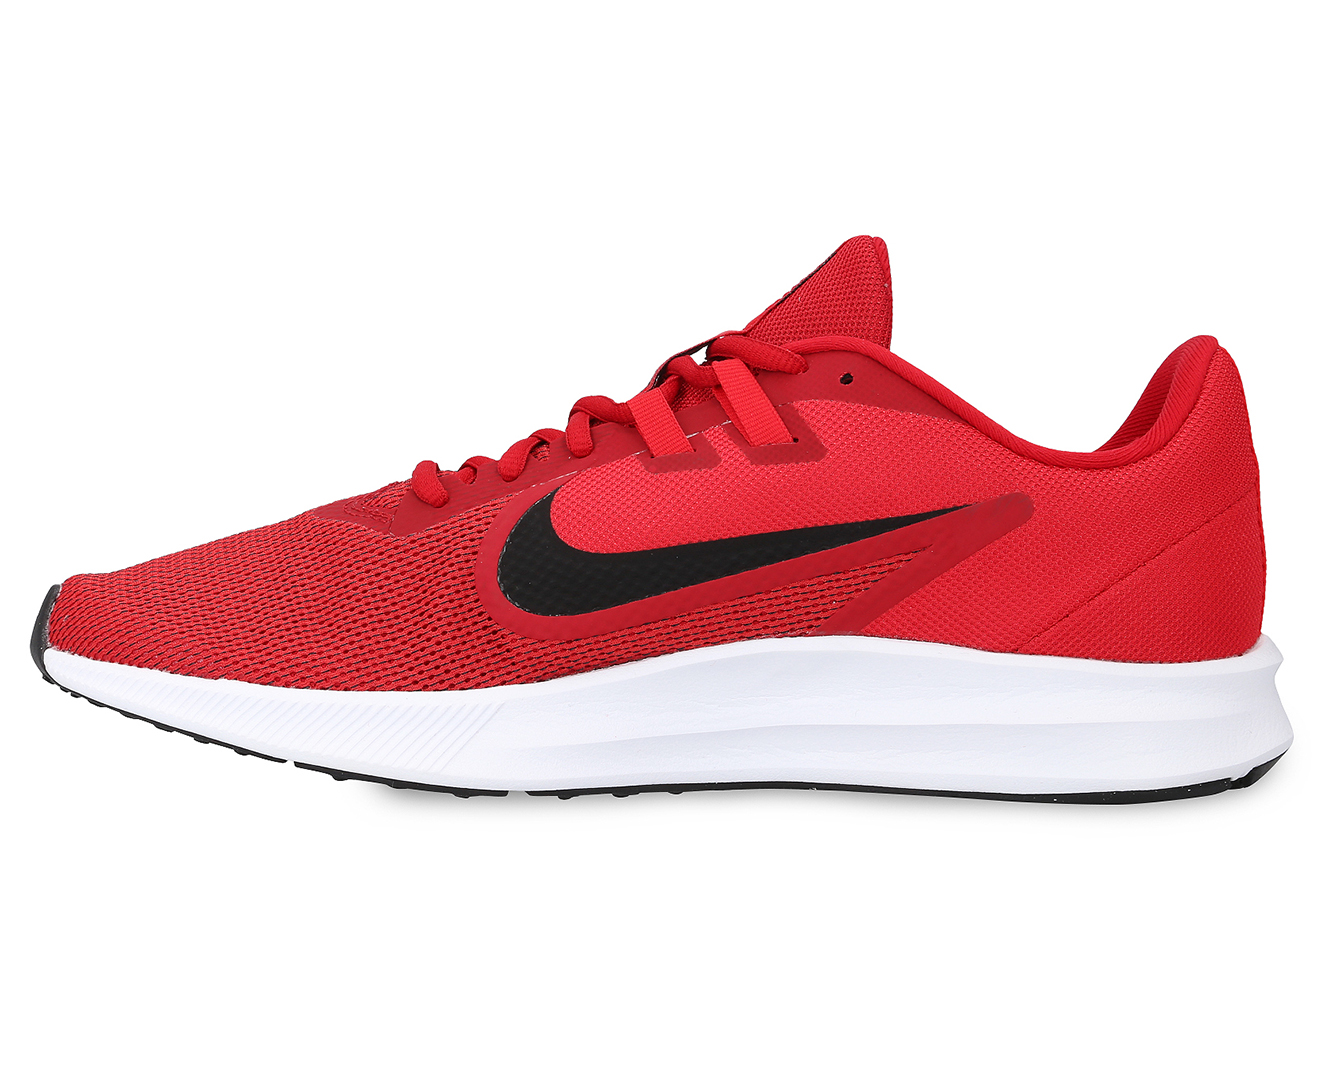 Nike Men's Downshifter 9 Running Shoes - Gym Red/Black/University Red ...